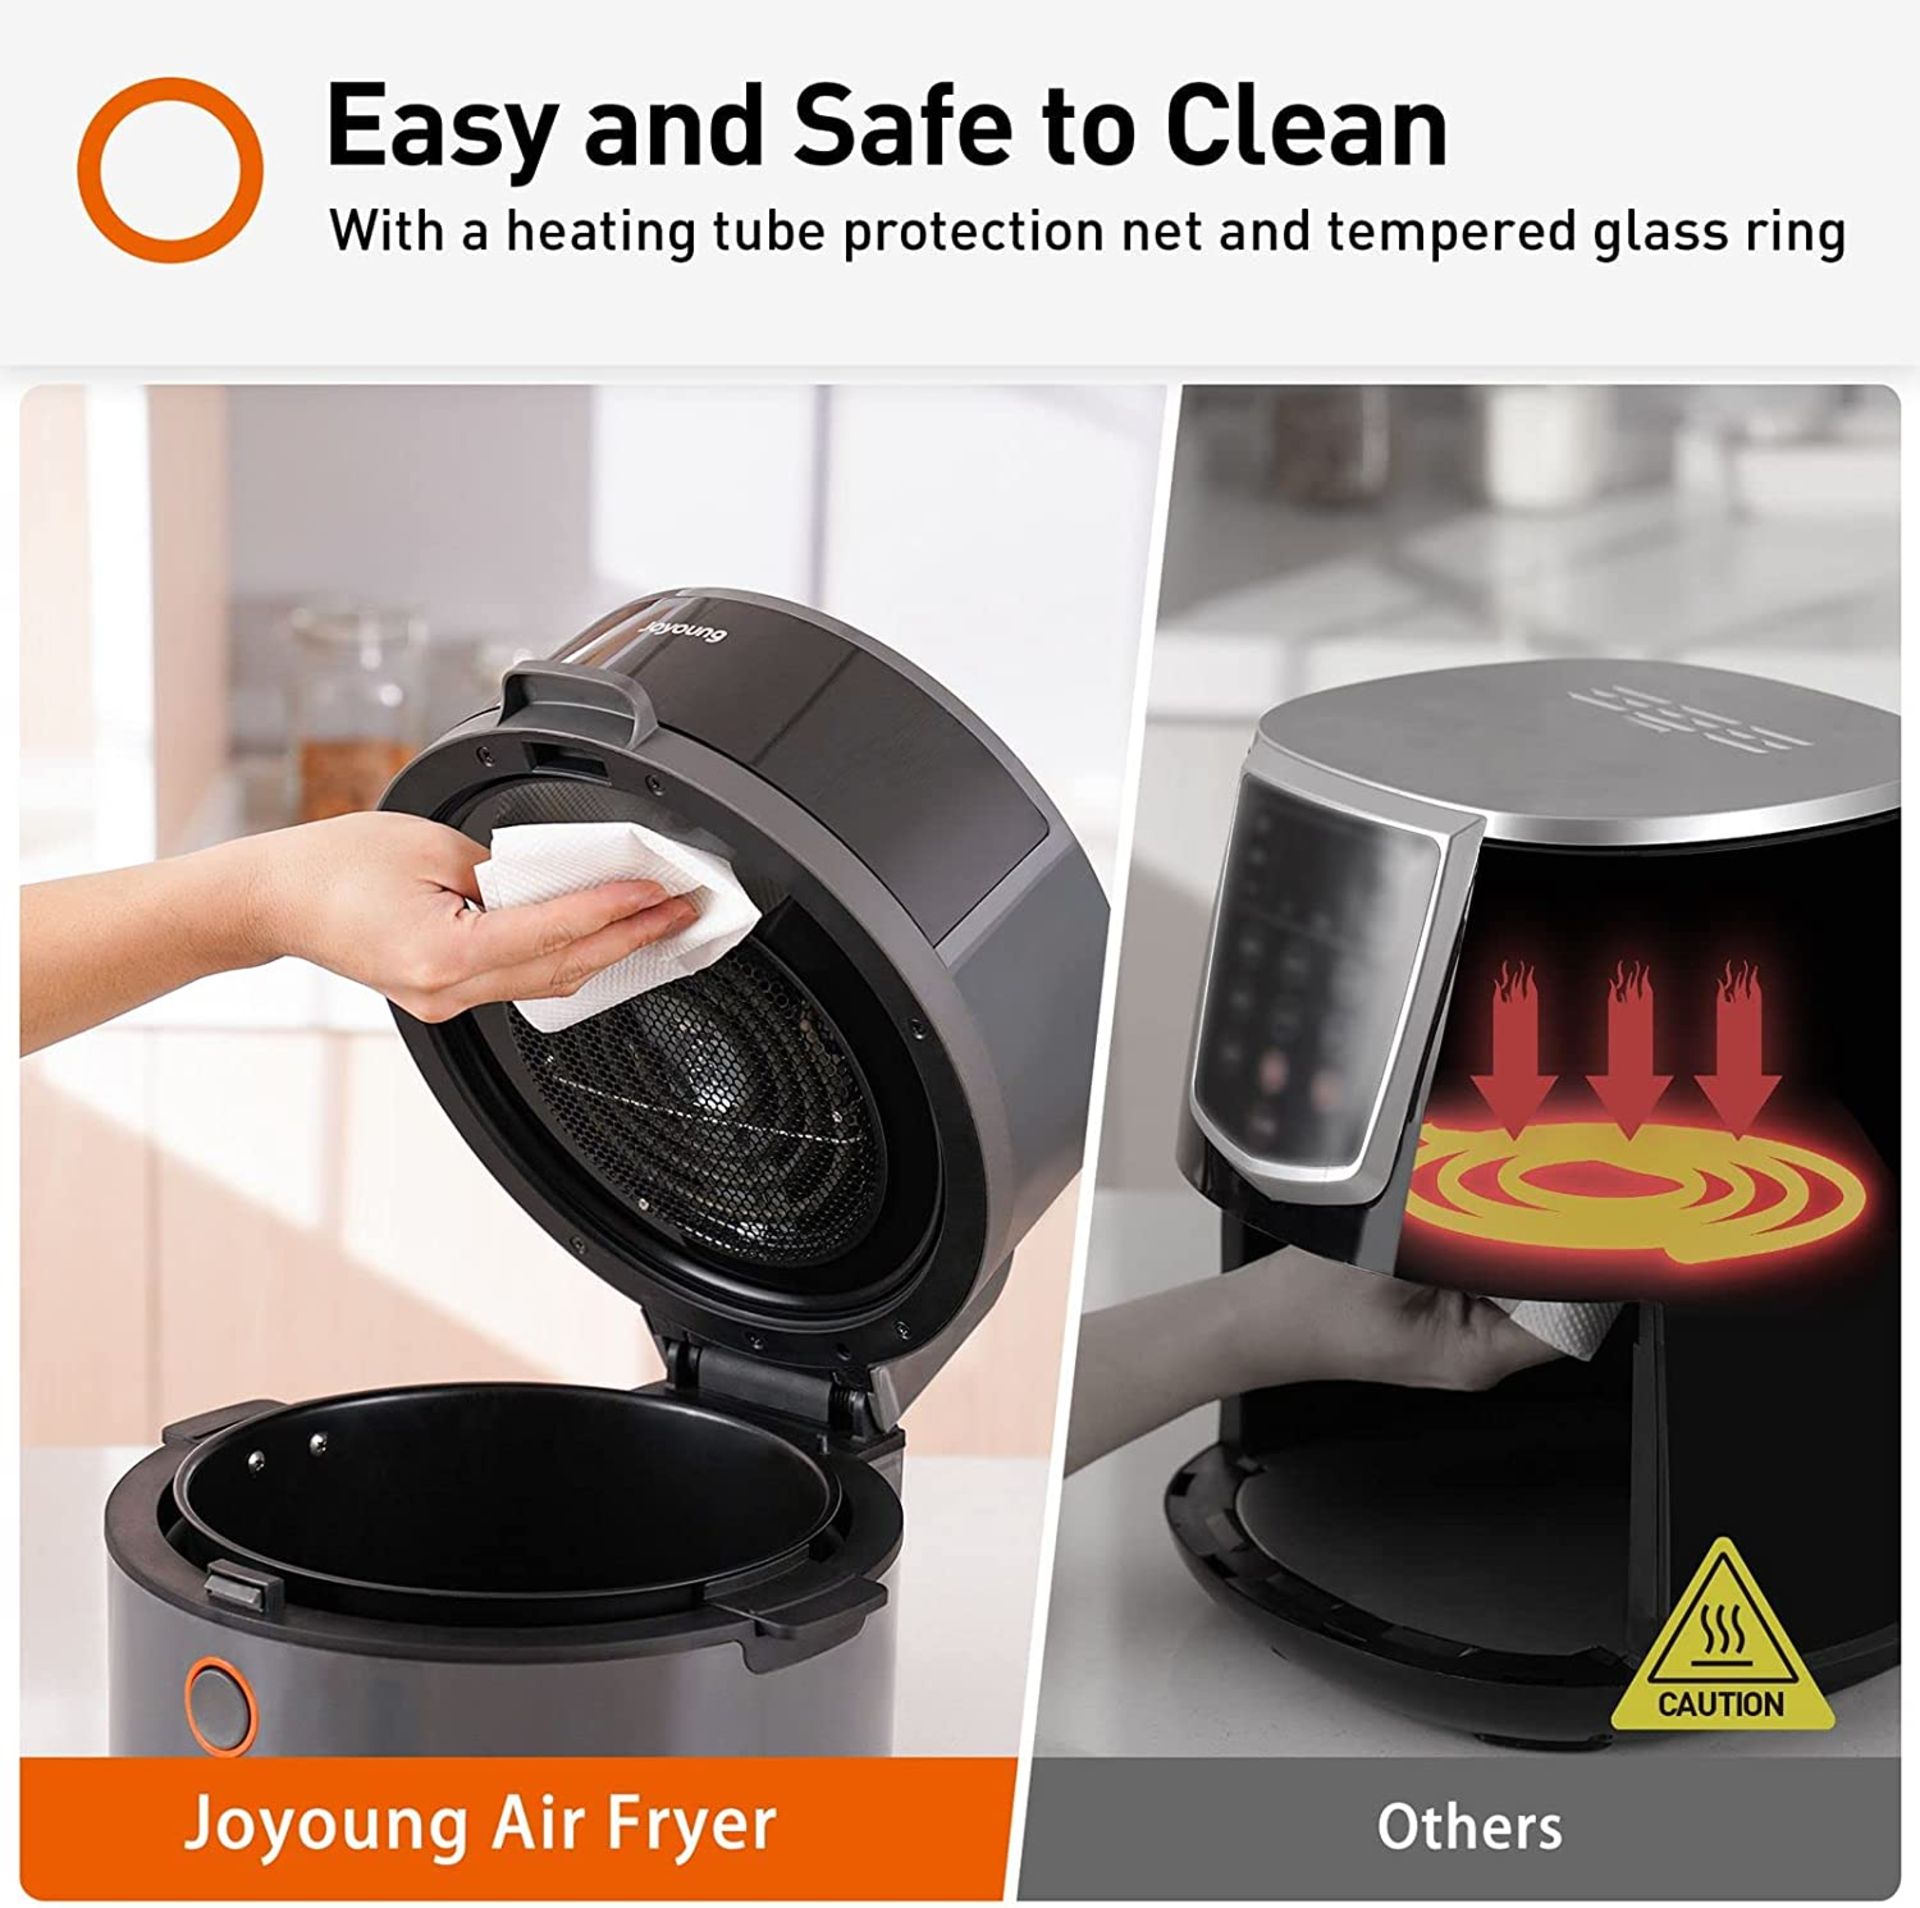 New Boxed JOYOUNG Air Fryer 10 in 1 Digital Air Fryer Toaster Oven 5.8Qt with Free Recipe. RRP £ - Image 6 of 10